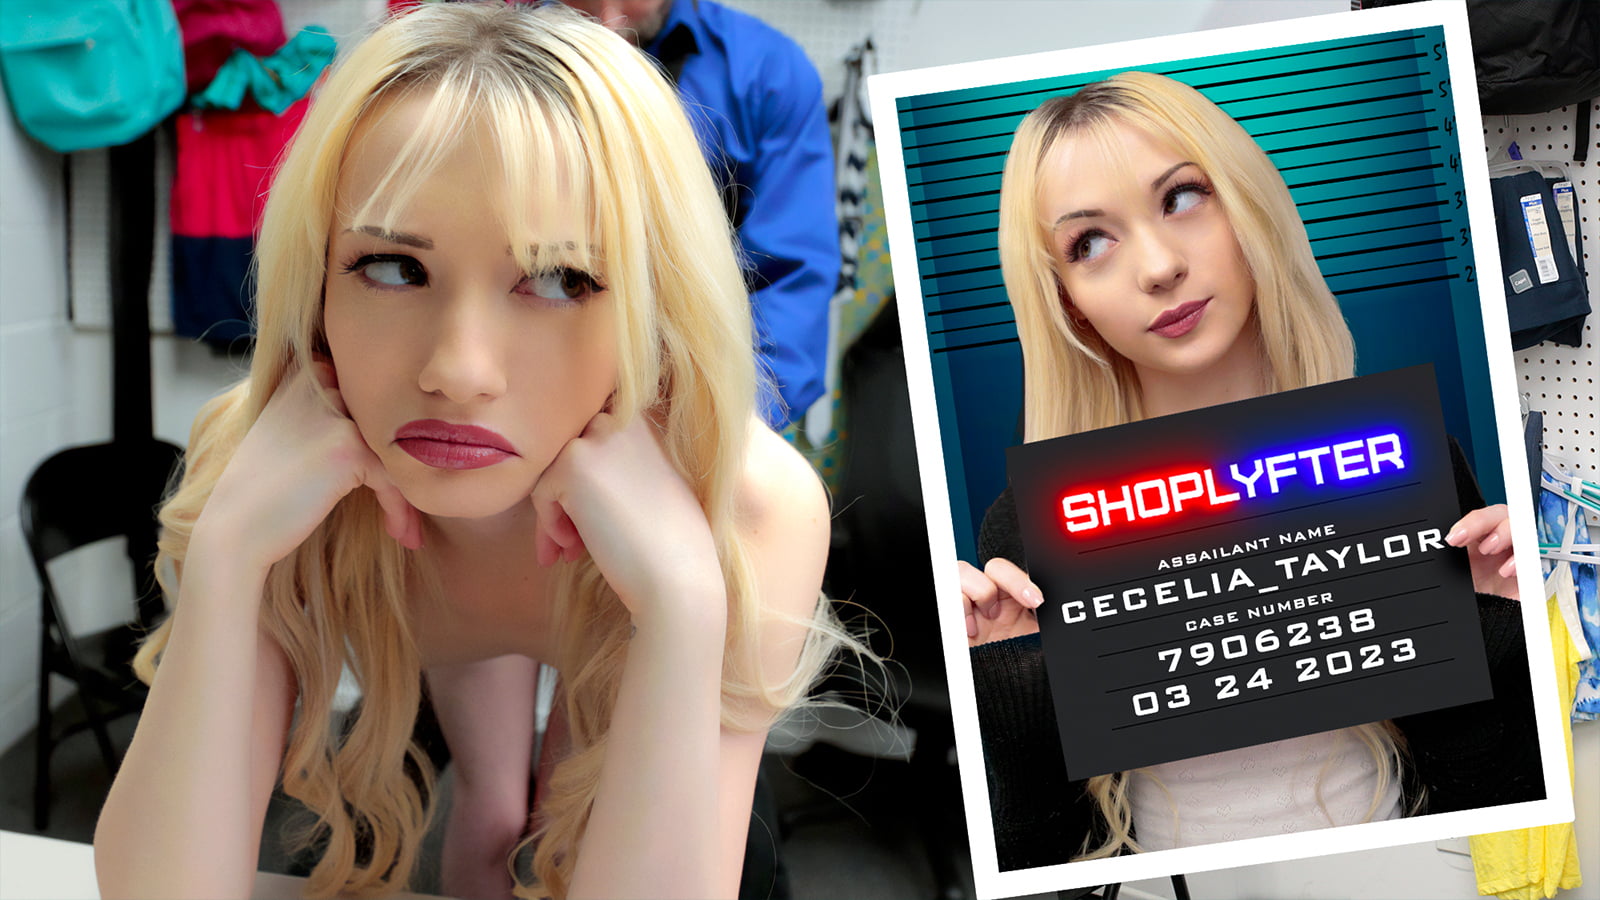 Shoplyfter - Cecelia Taylor - The Influencer Thief